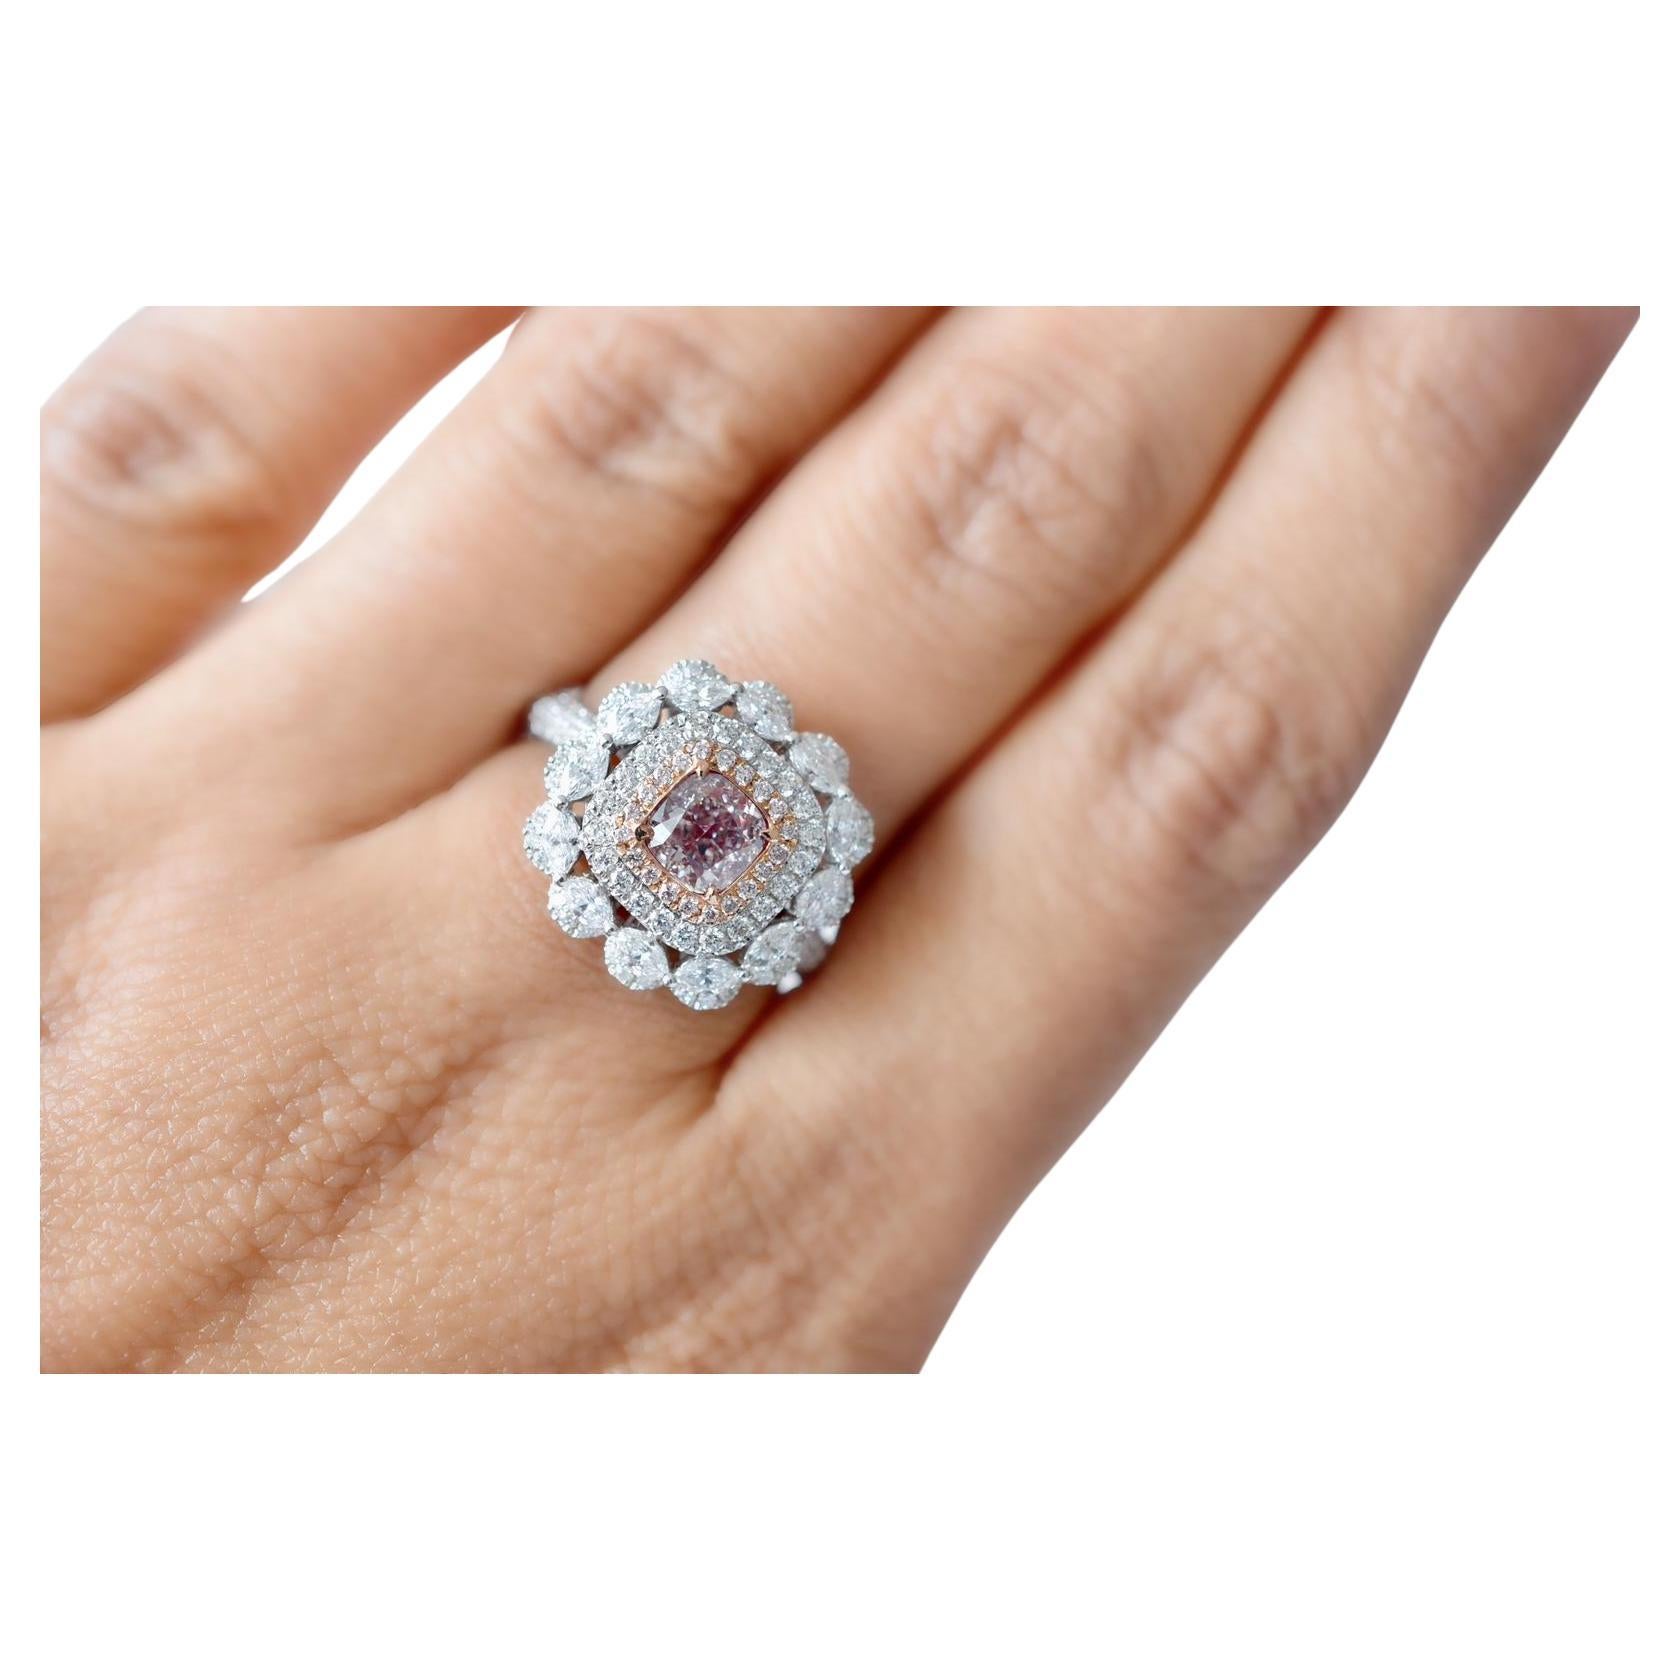 0.83 Carat Fancy Light Pinkish Brown Diamond Ring VS1 Clarity GIA Certified For Sale